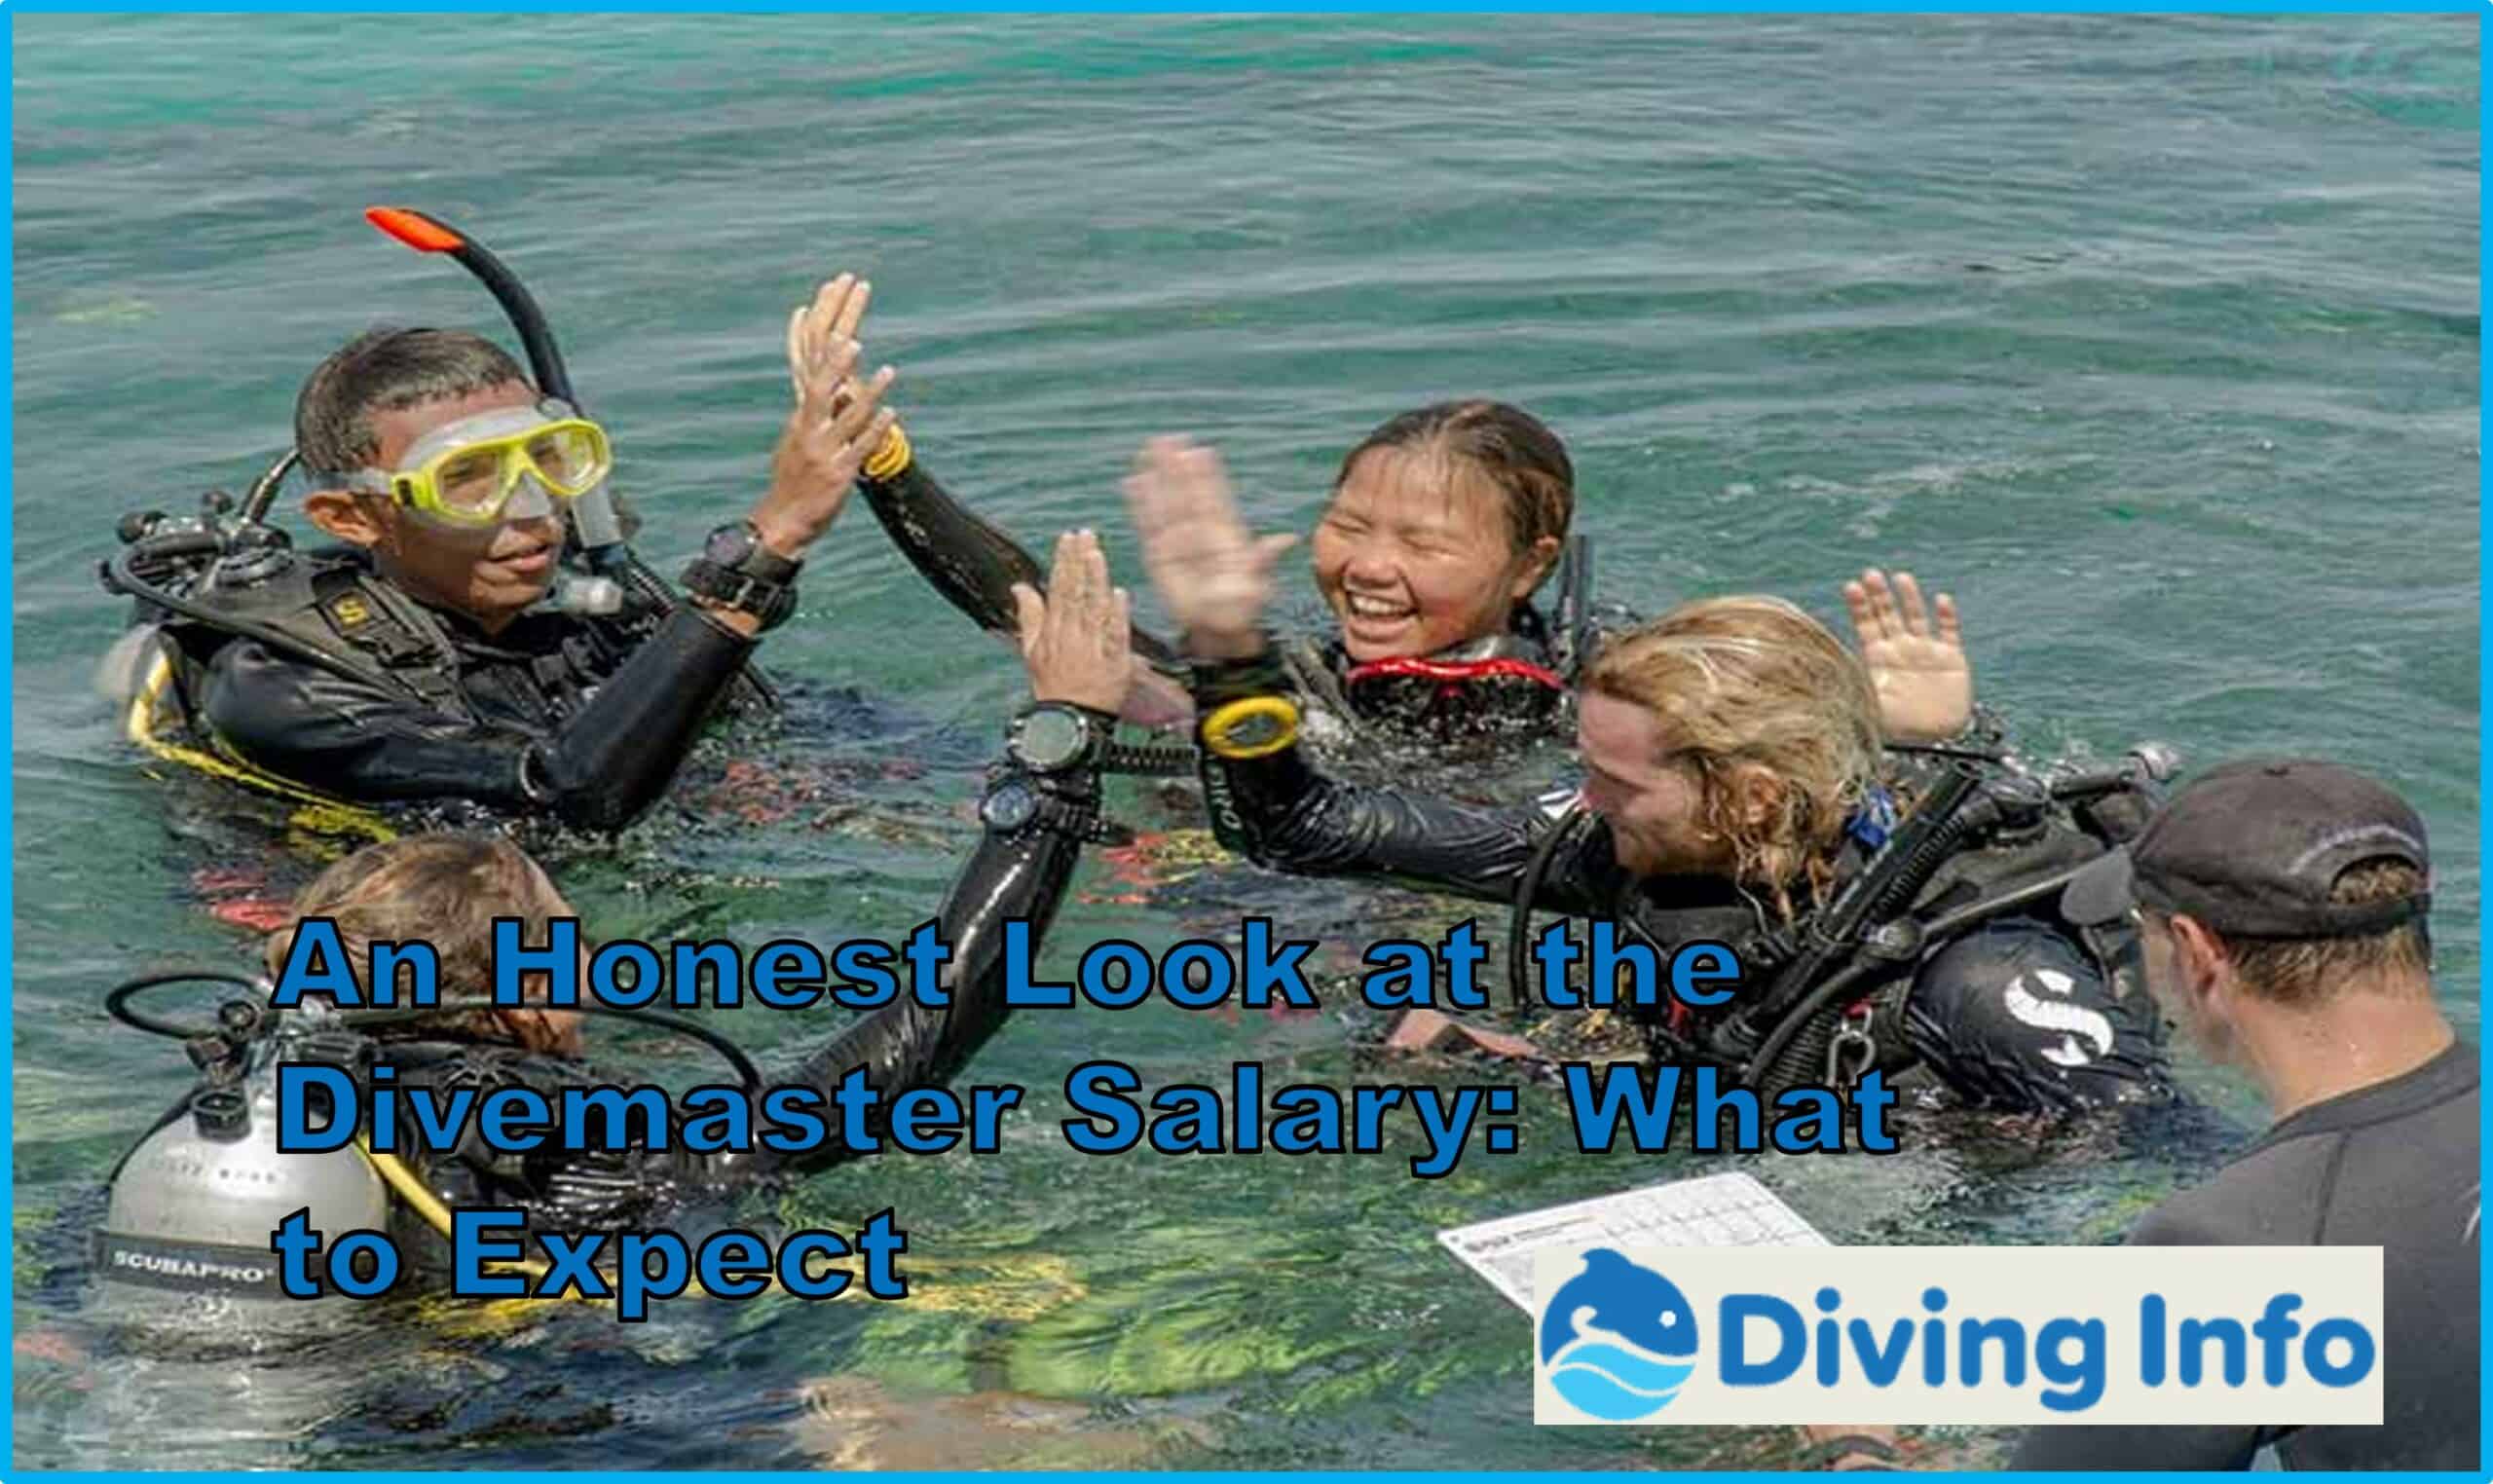 An Honest Look at the Divemaster Salary: What to Expect